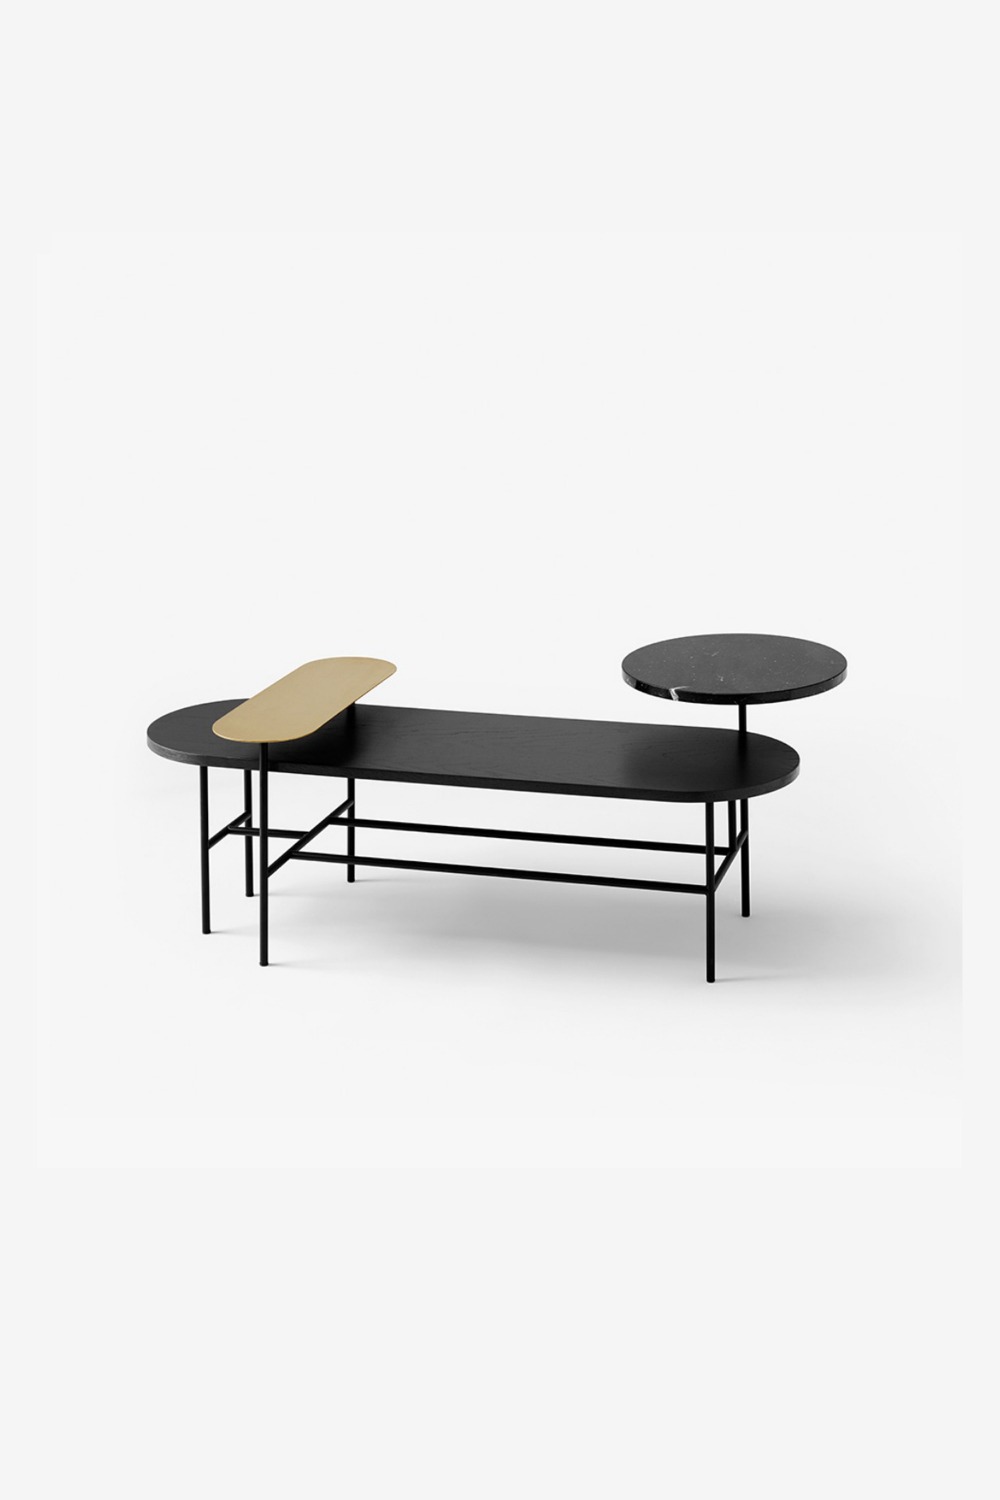 [&amp;Tradition] Palette Lounge Table / JH7 (Black)